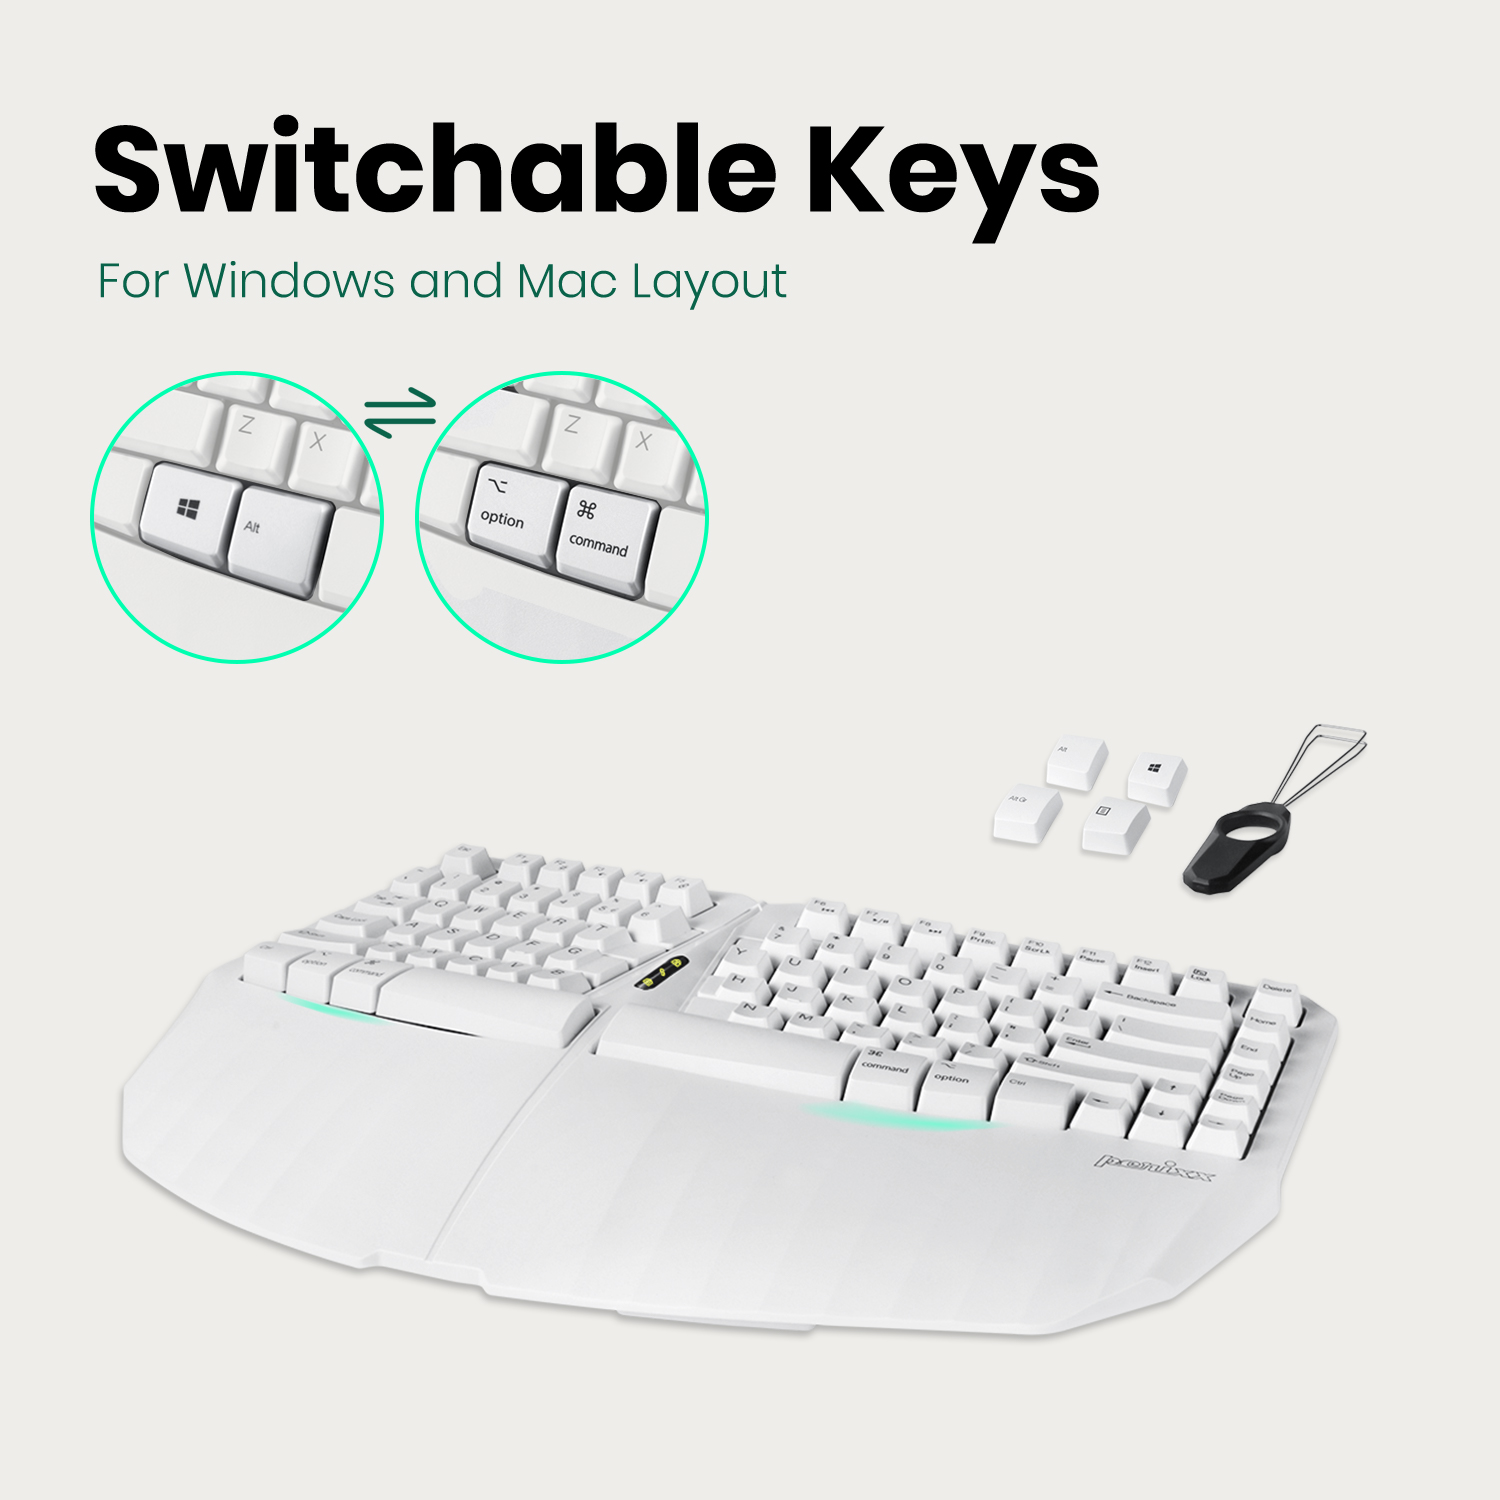  SWITCHABLE KEYS FOR MAC  AND WINDOWS LAYOUT